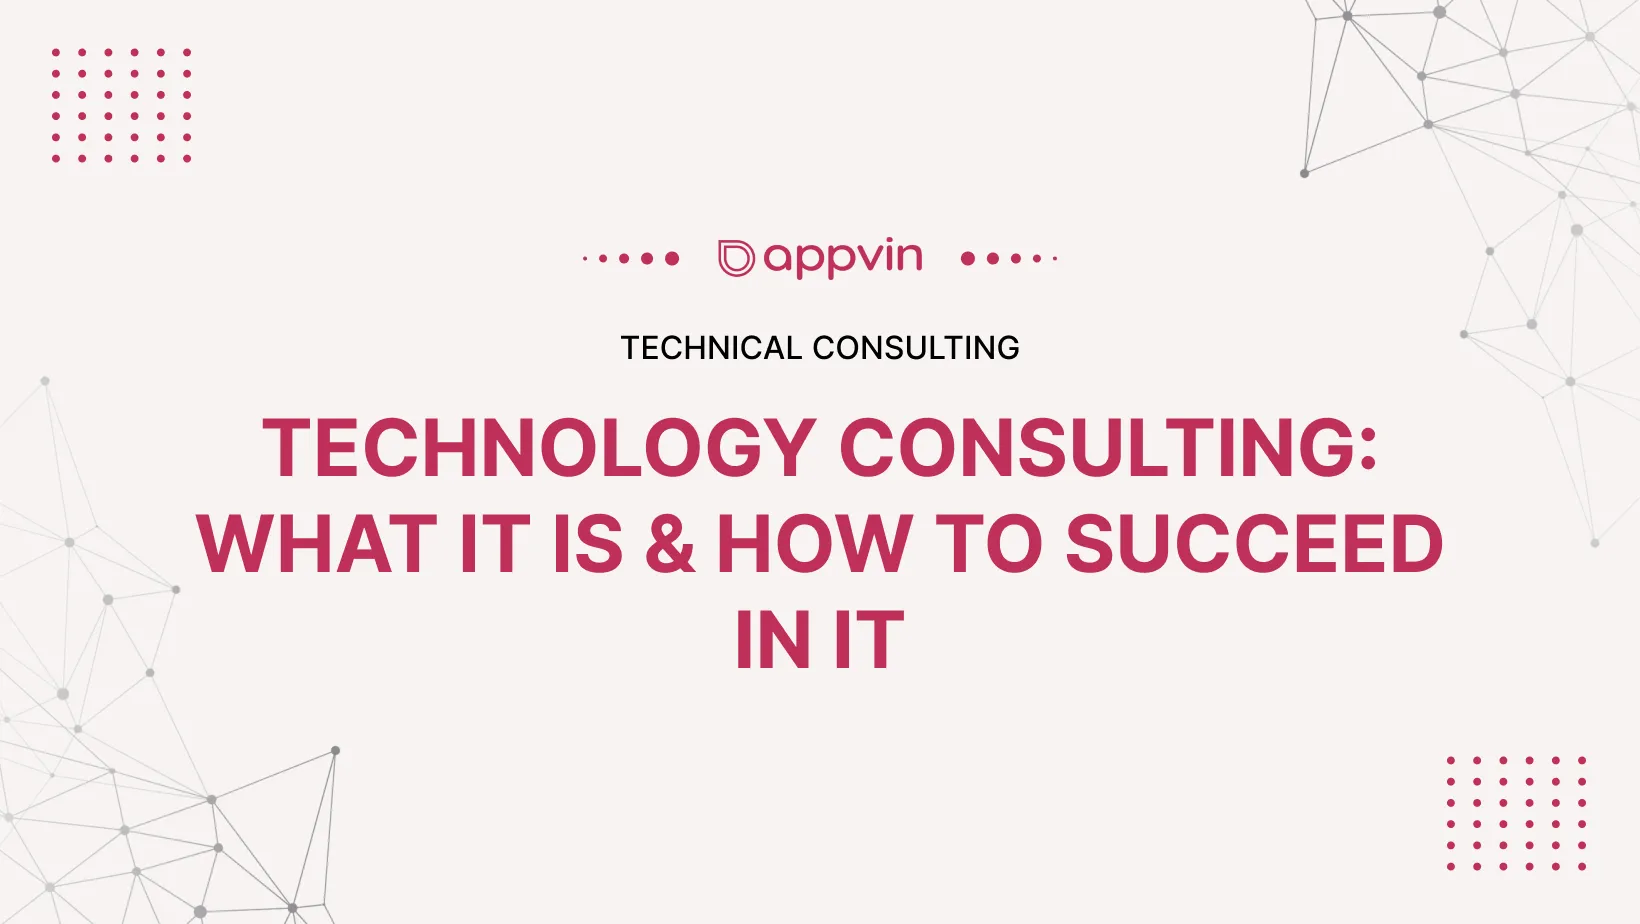 Technology Consulting: What It Is & How to Succeed in It 